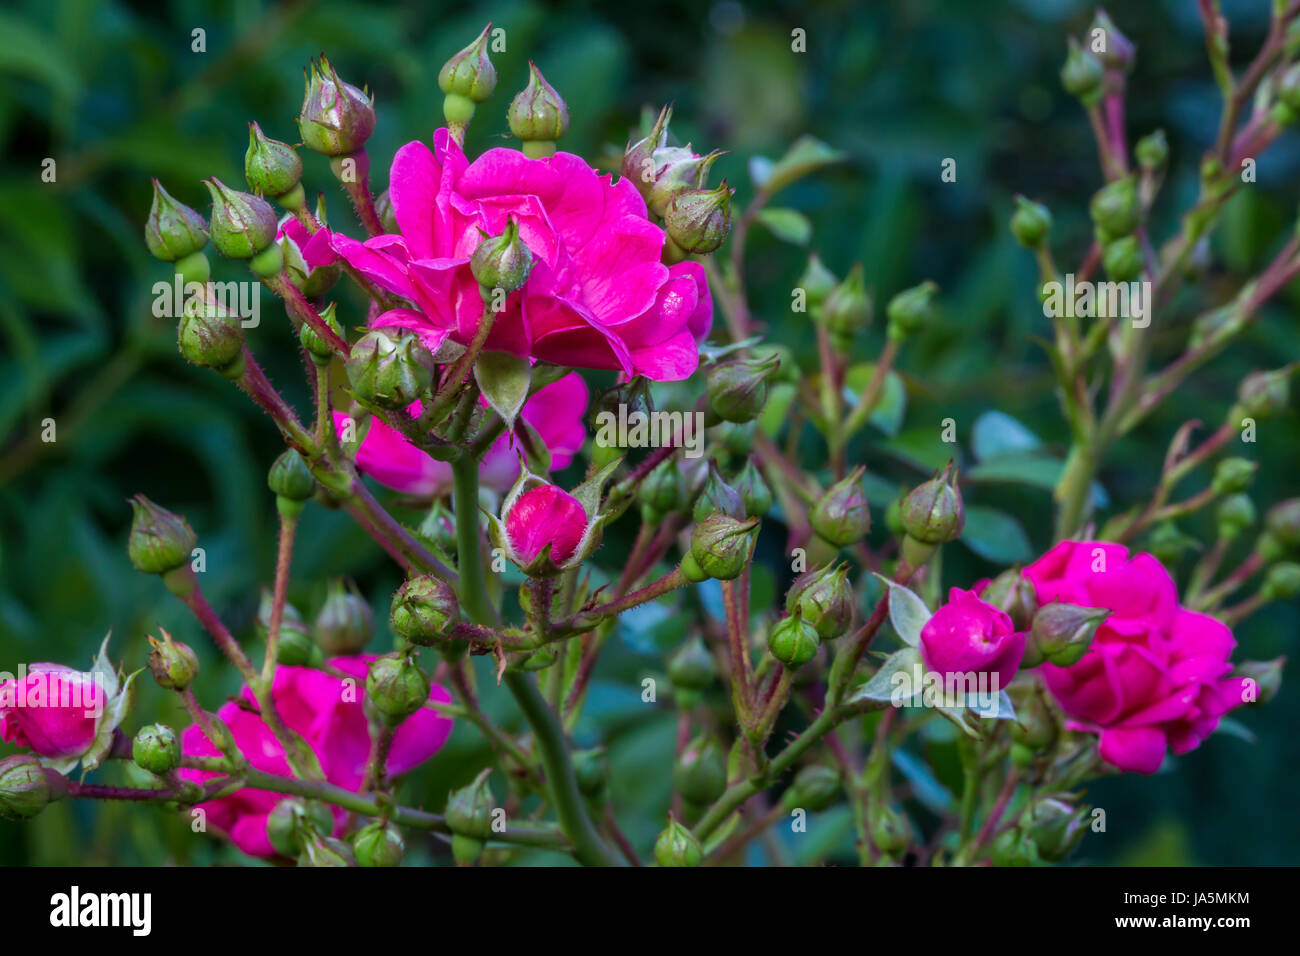 leaf, object, single, isolated, flower, plant, rose, green, bloom, blossom, Stock Photo